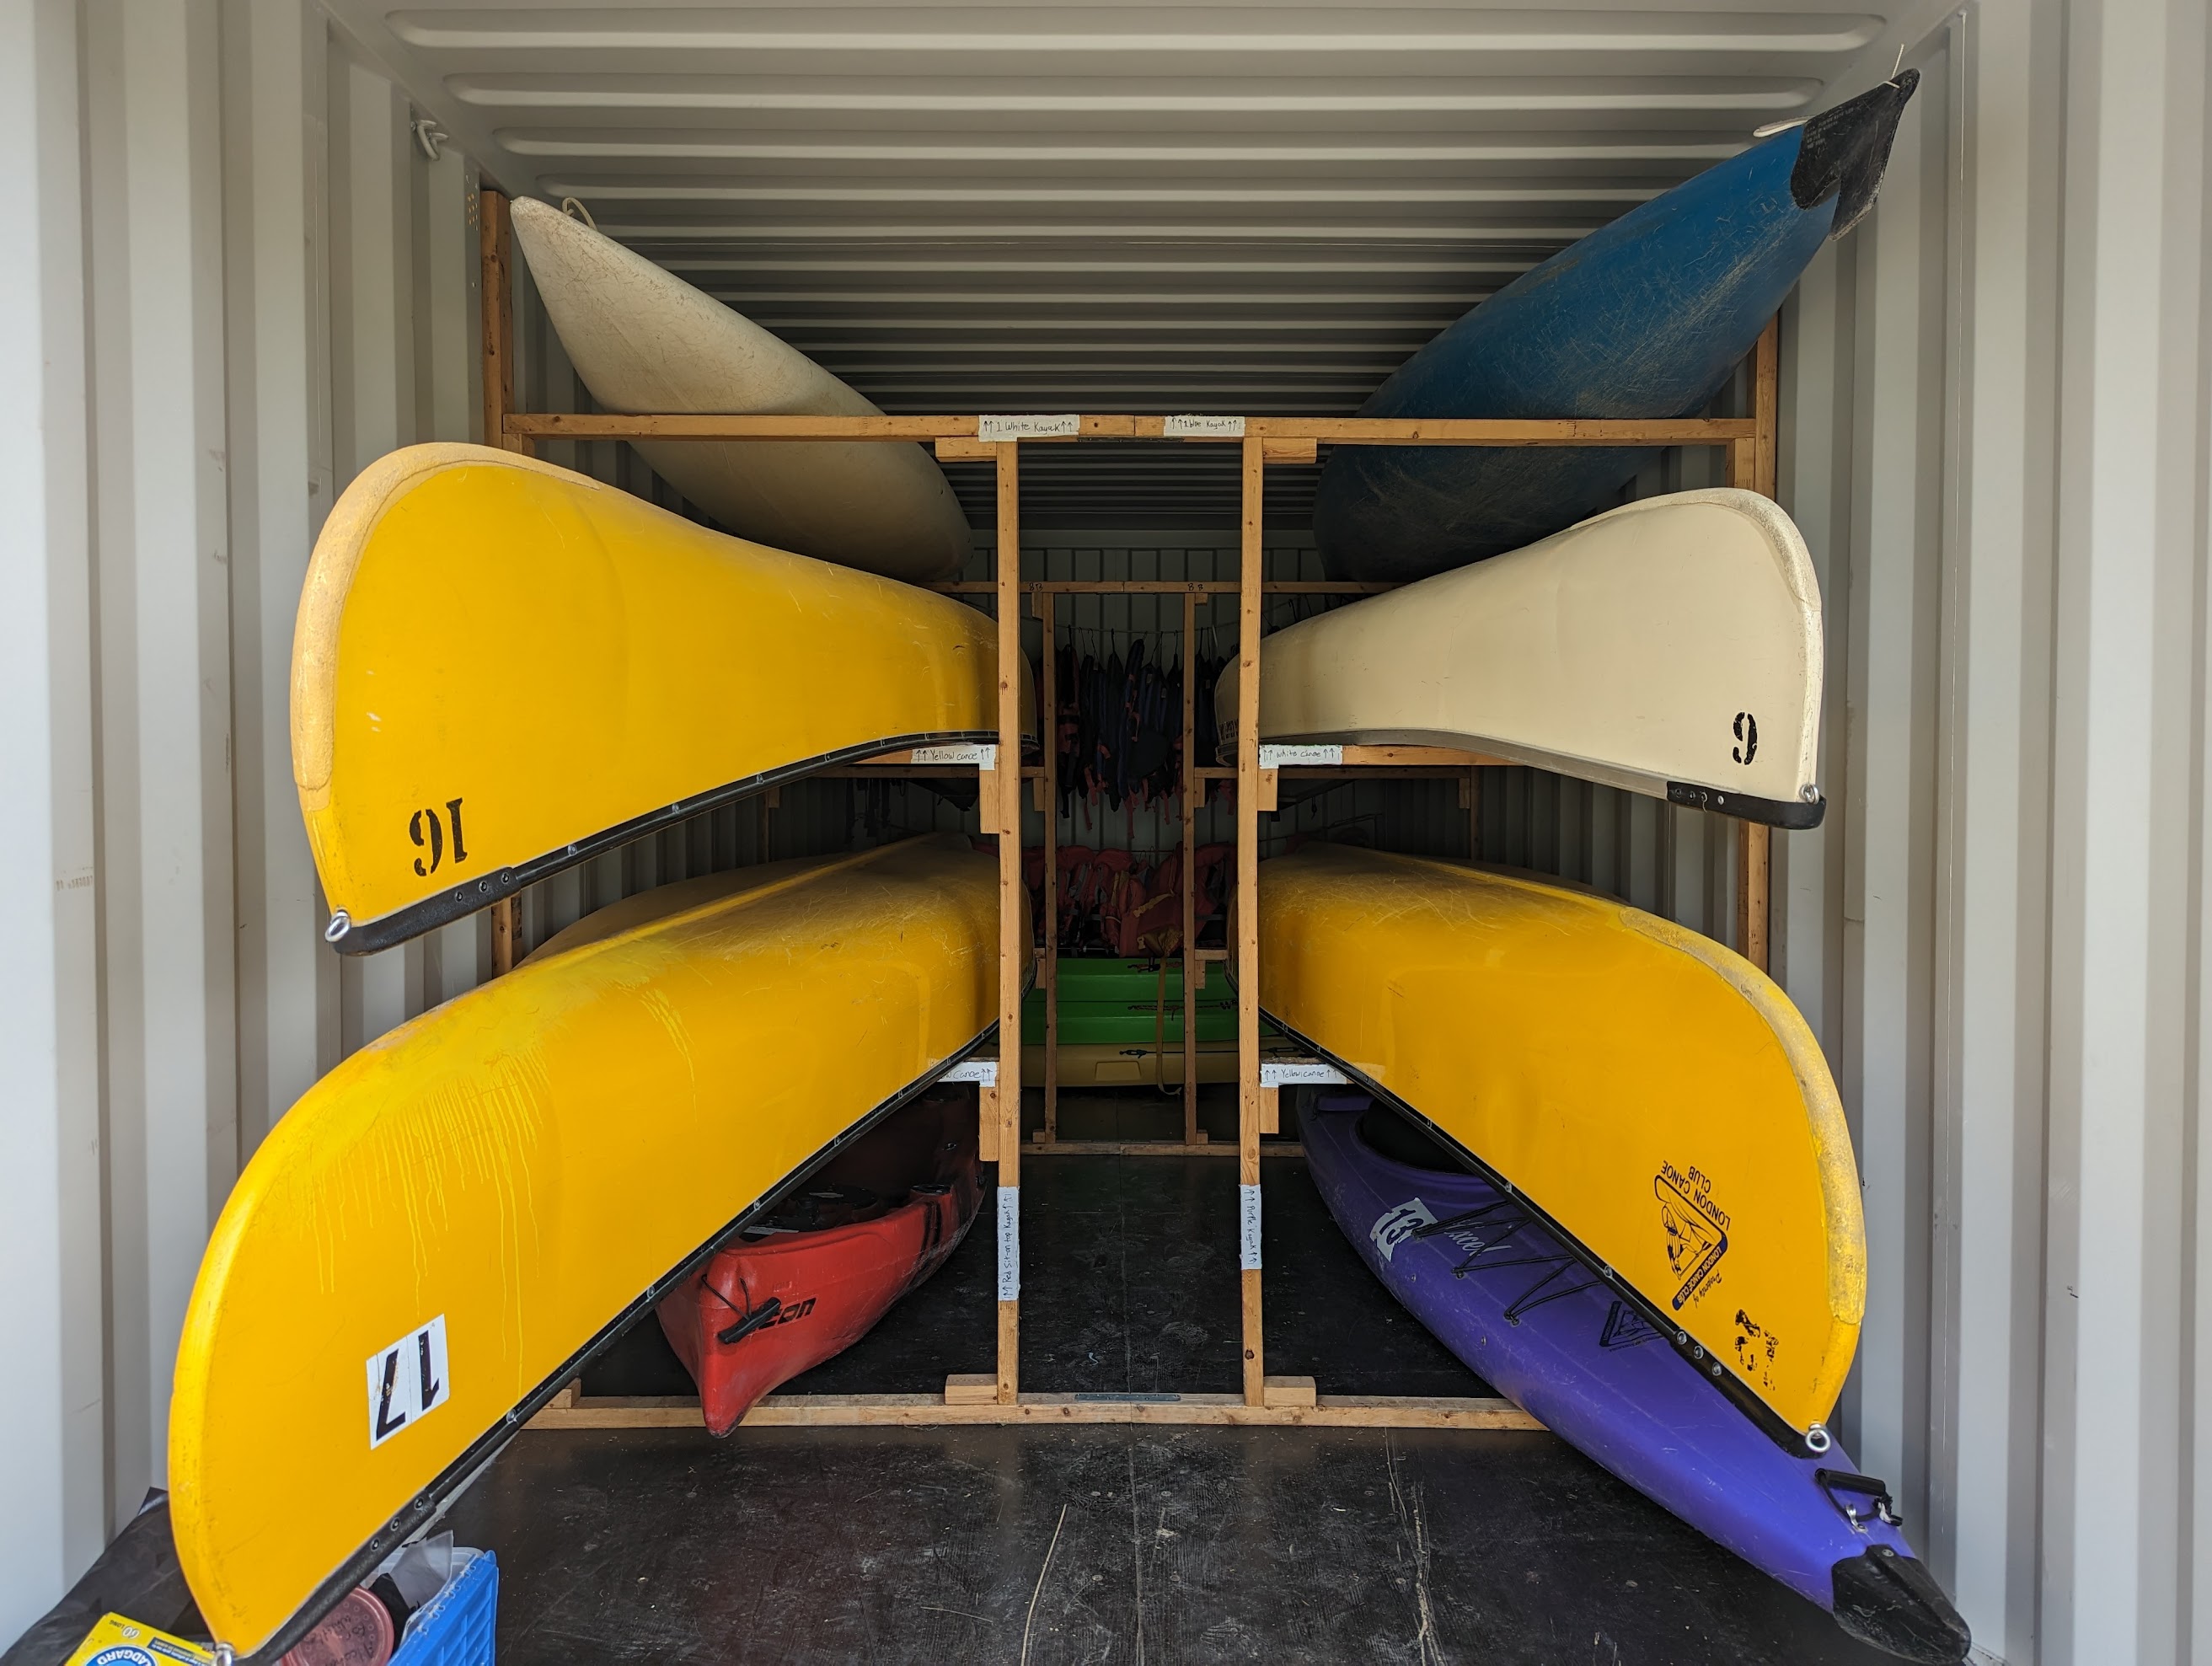 A variety of canoes and kayaks on racks